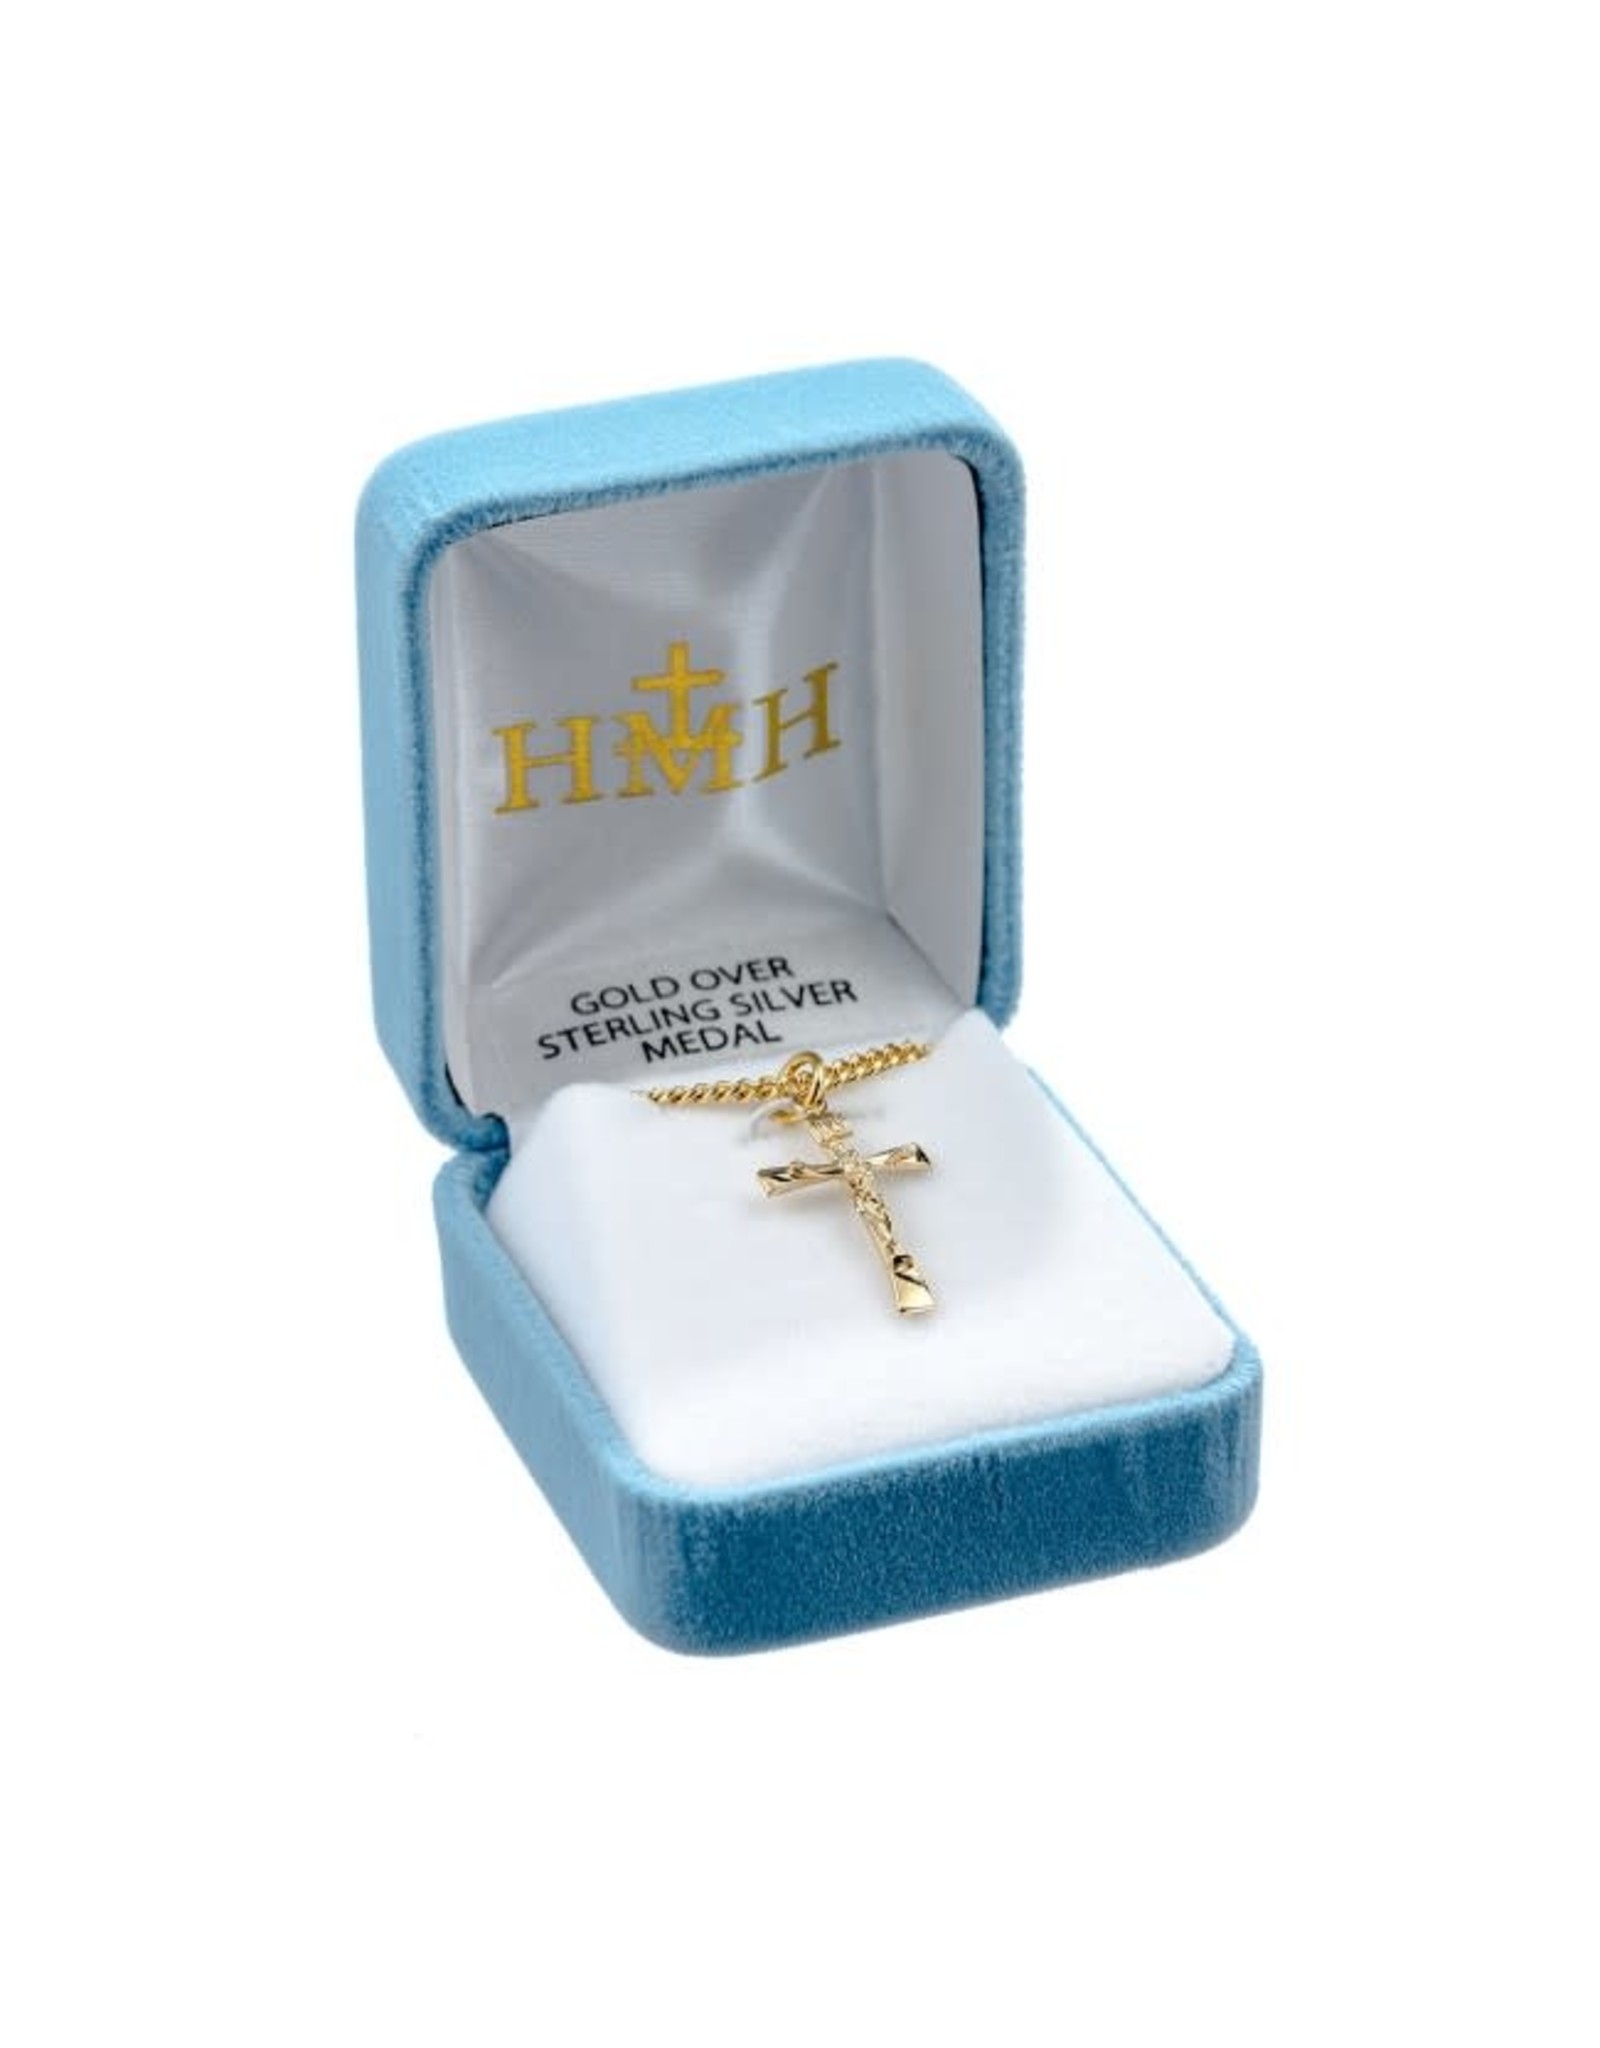 HMH 16 Karat Gold Over Sterling Silver Small Crucifix with Tapered Ends on 18” Chain, Boxed